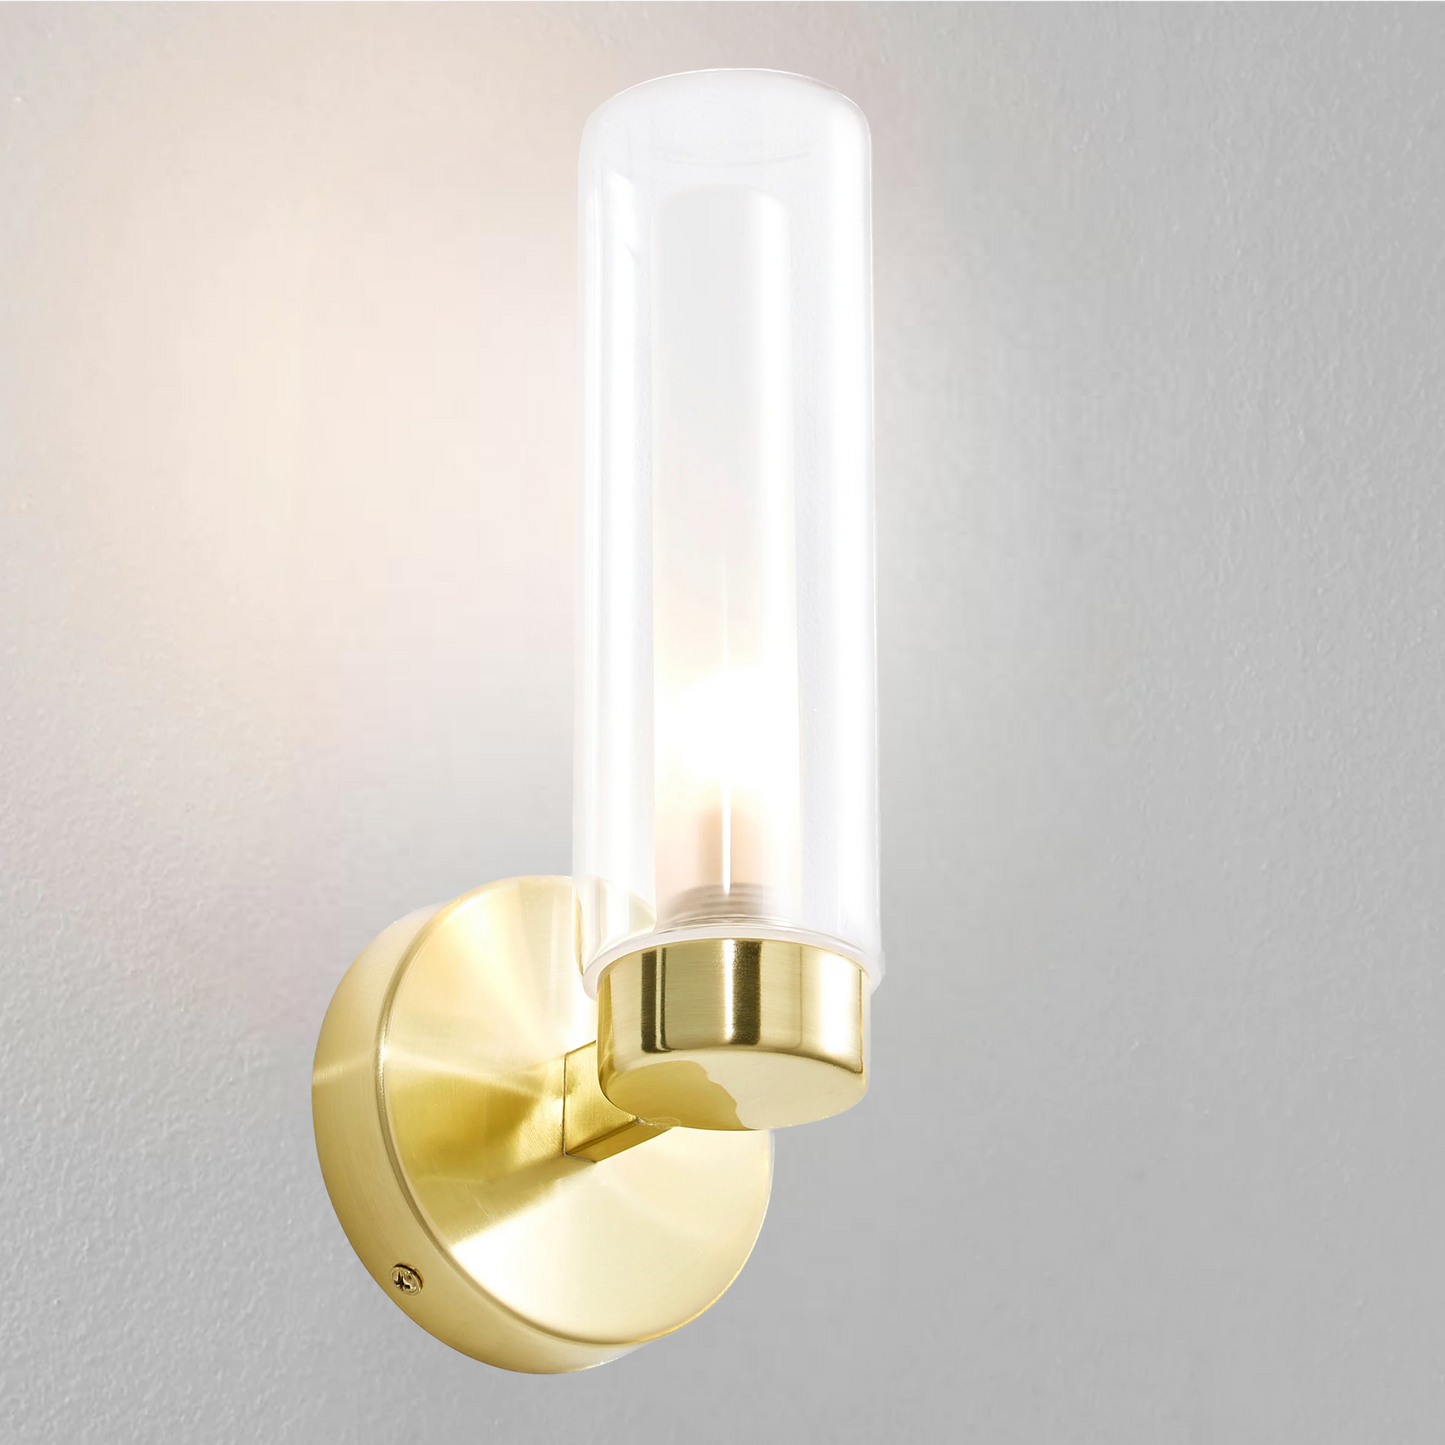 Our Nada satin brass wall light with clear glass diffuser adds a touch of opulence and luxury to the walls of your home. The modern light fitting would look perfect fitted next to a mirror, on corridors or hallways, bedside and living rooms, and as a bonus to this light the IP44 protection makes it suitable for all bathrooms.